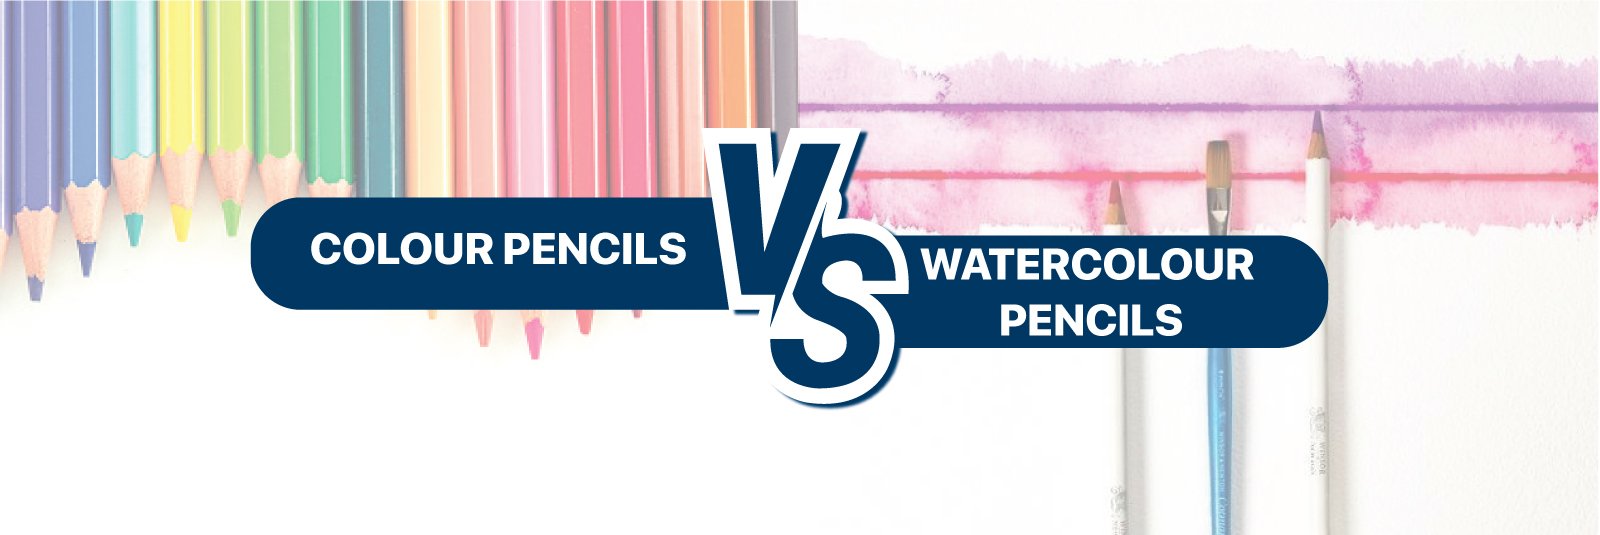 What is the difference between Colour pencils and Watercolour pencils